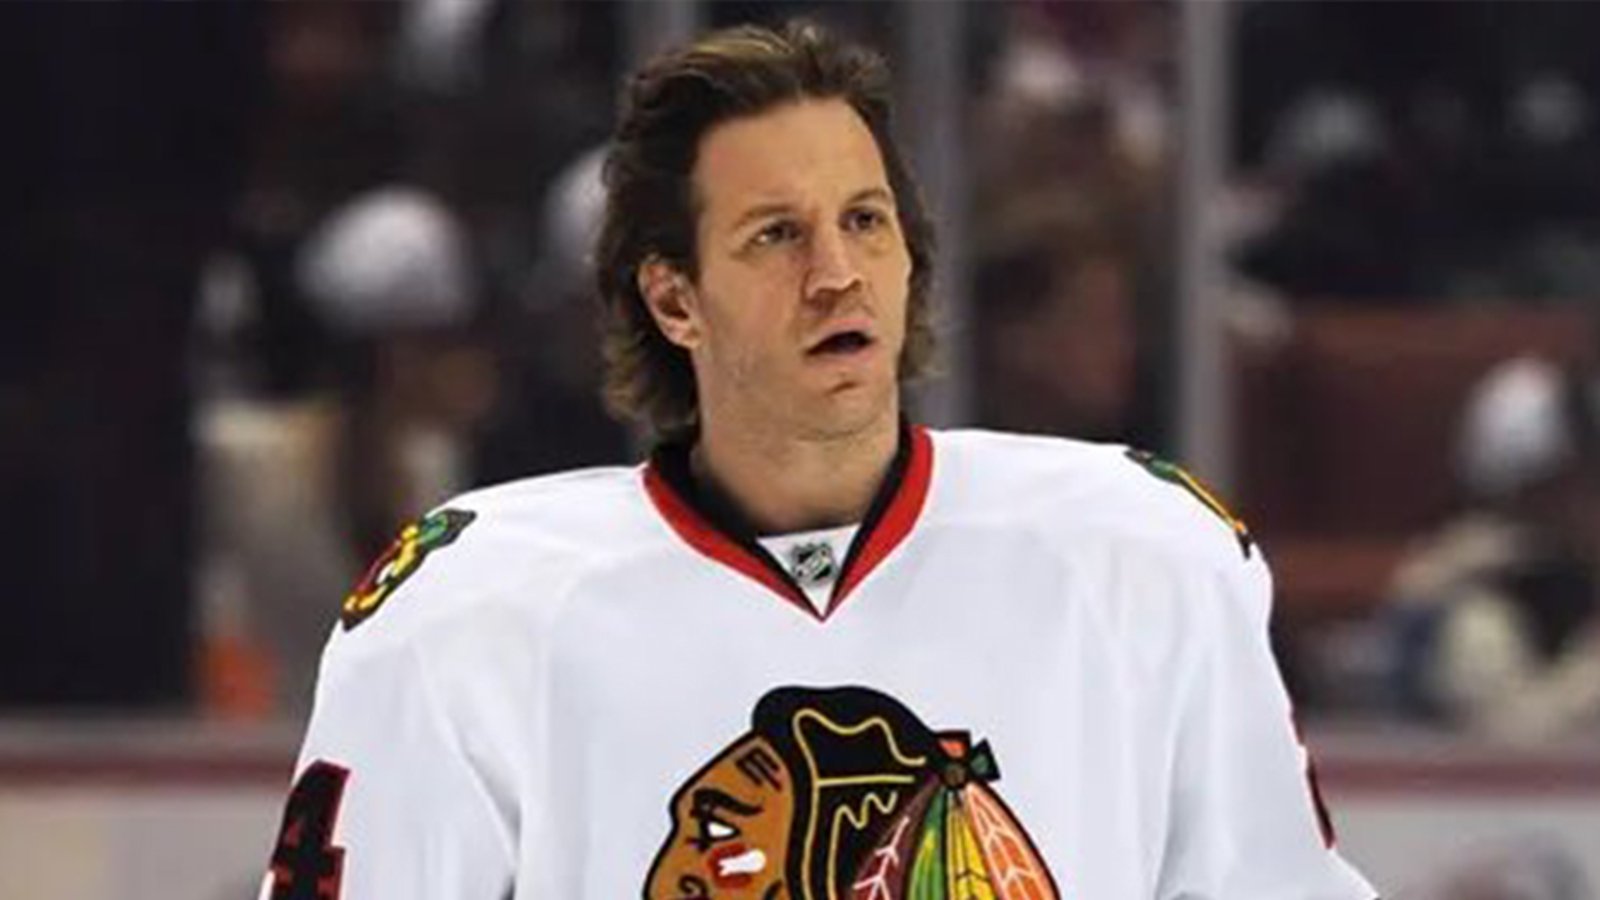 Former Blackhawk Nick Boynton calls out Patrick Kane, Brian Campbell and Patrick Sharp in sexual abuse scandal